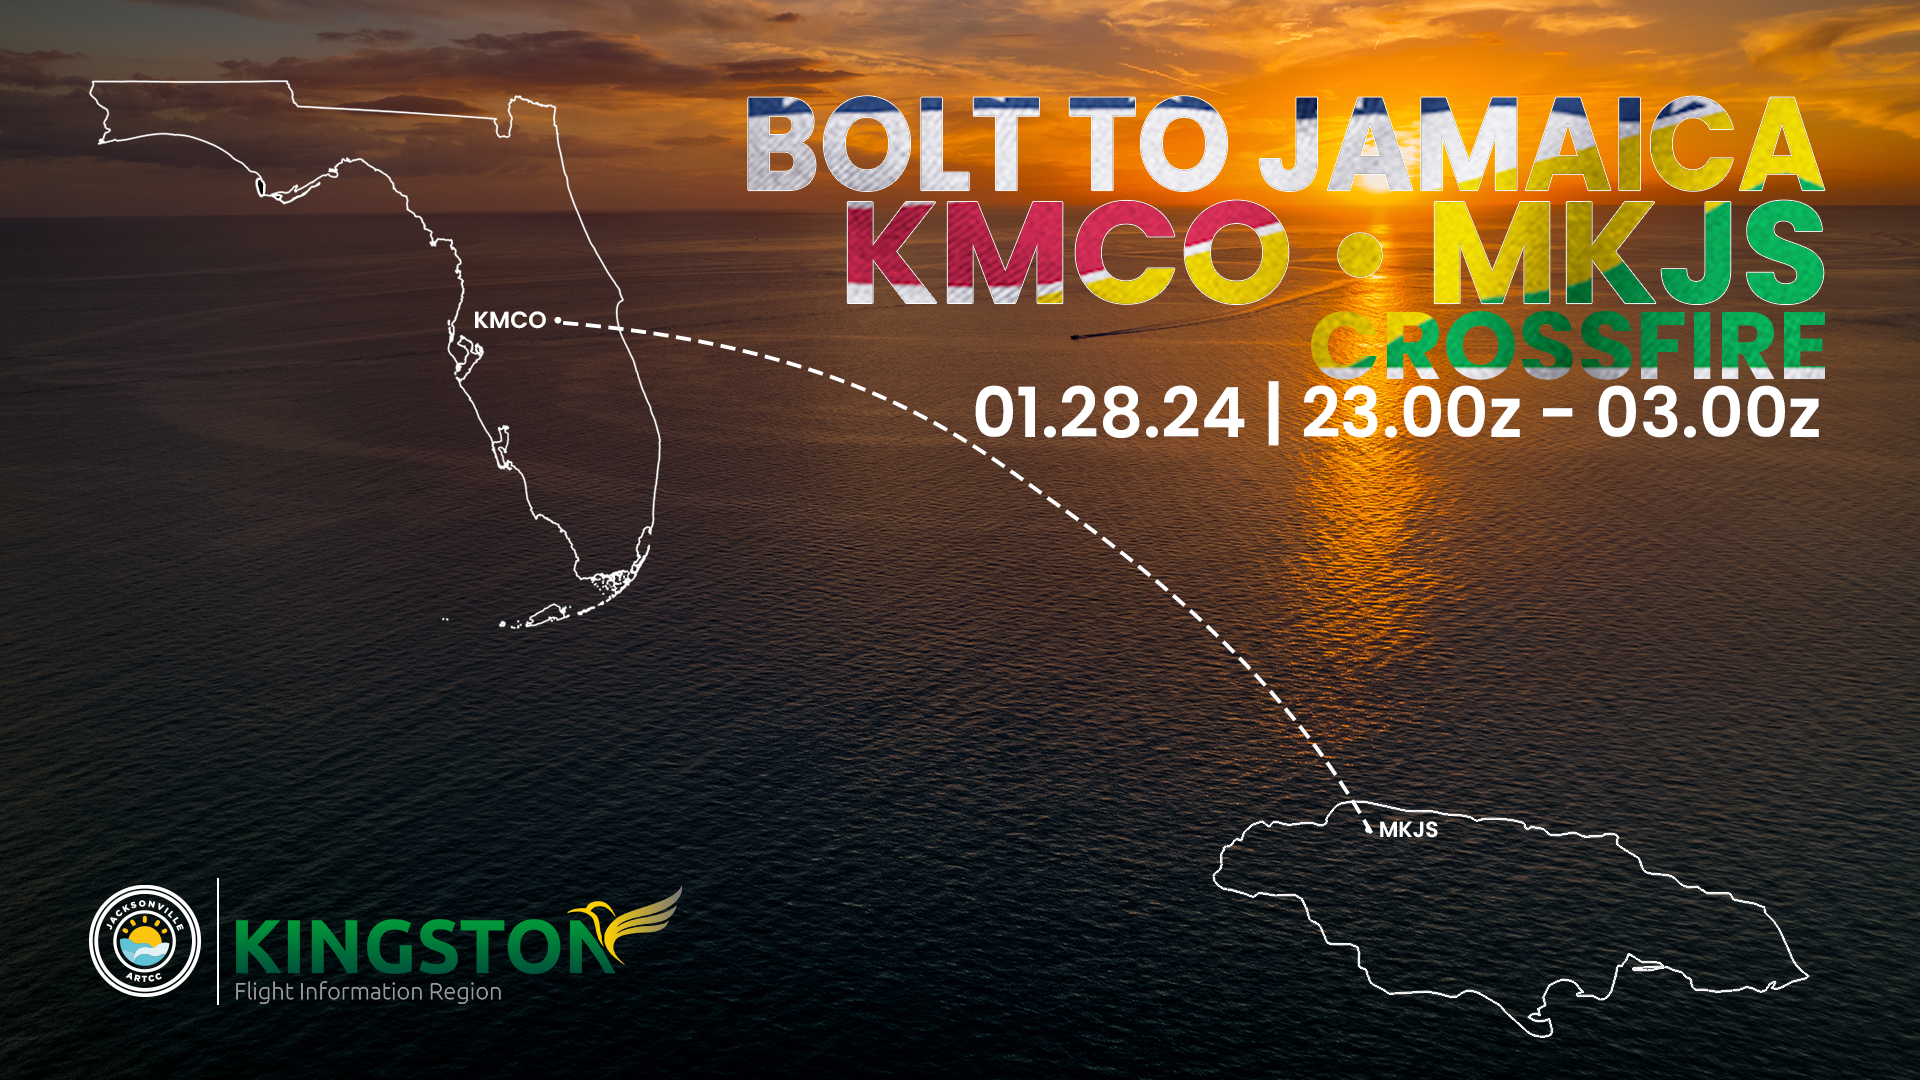 Bolt to Jamaica: Crossfire Event with MCO - Virtual Norwegian Events